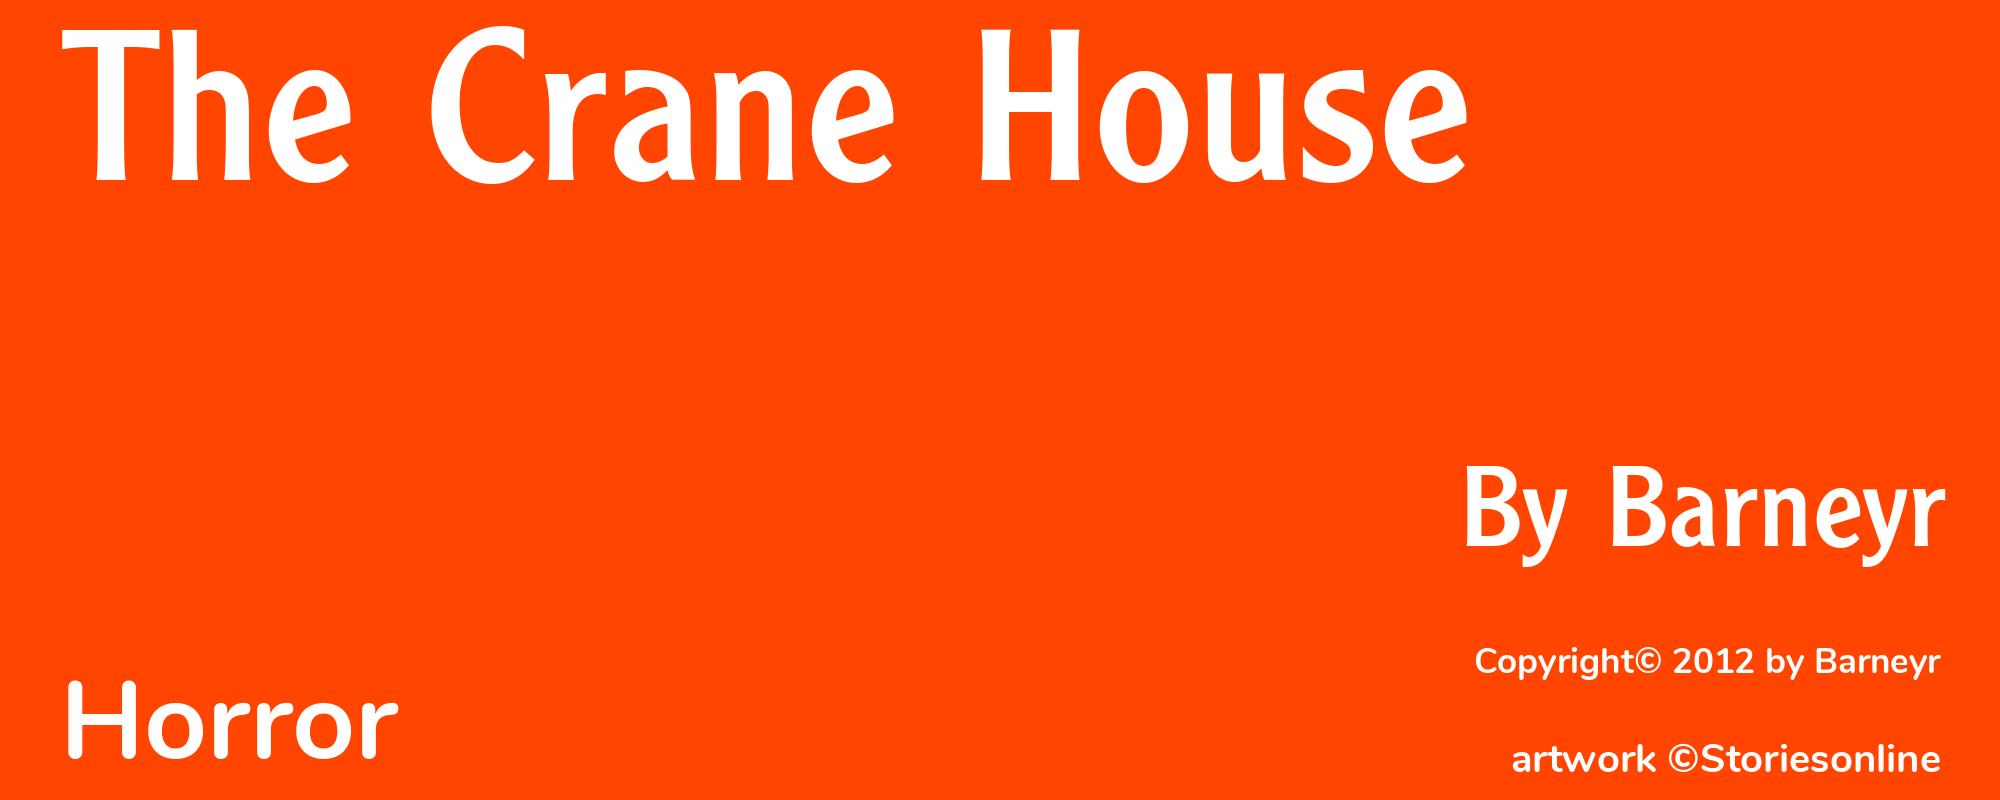 The Crane House - Cover